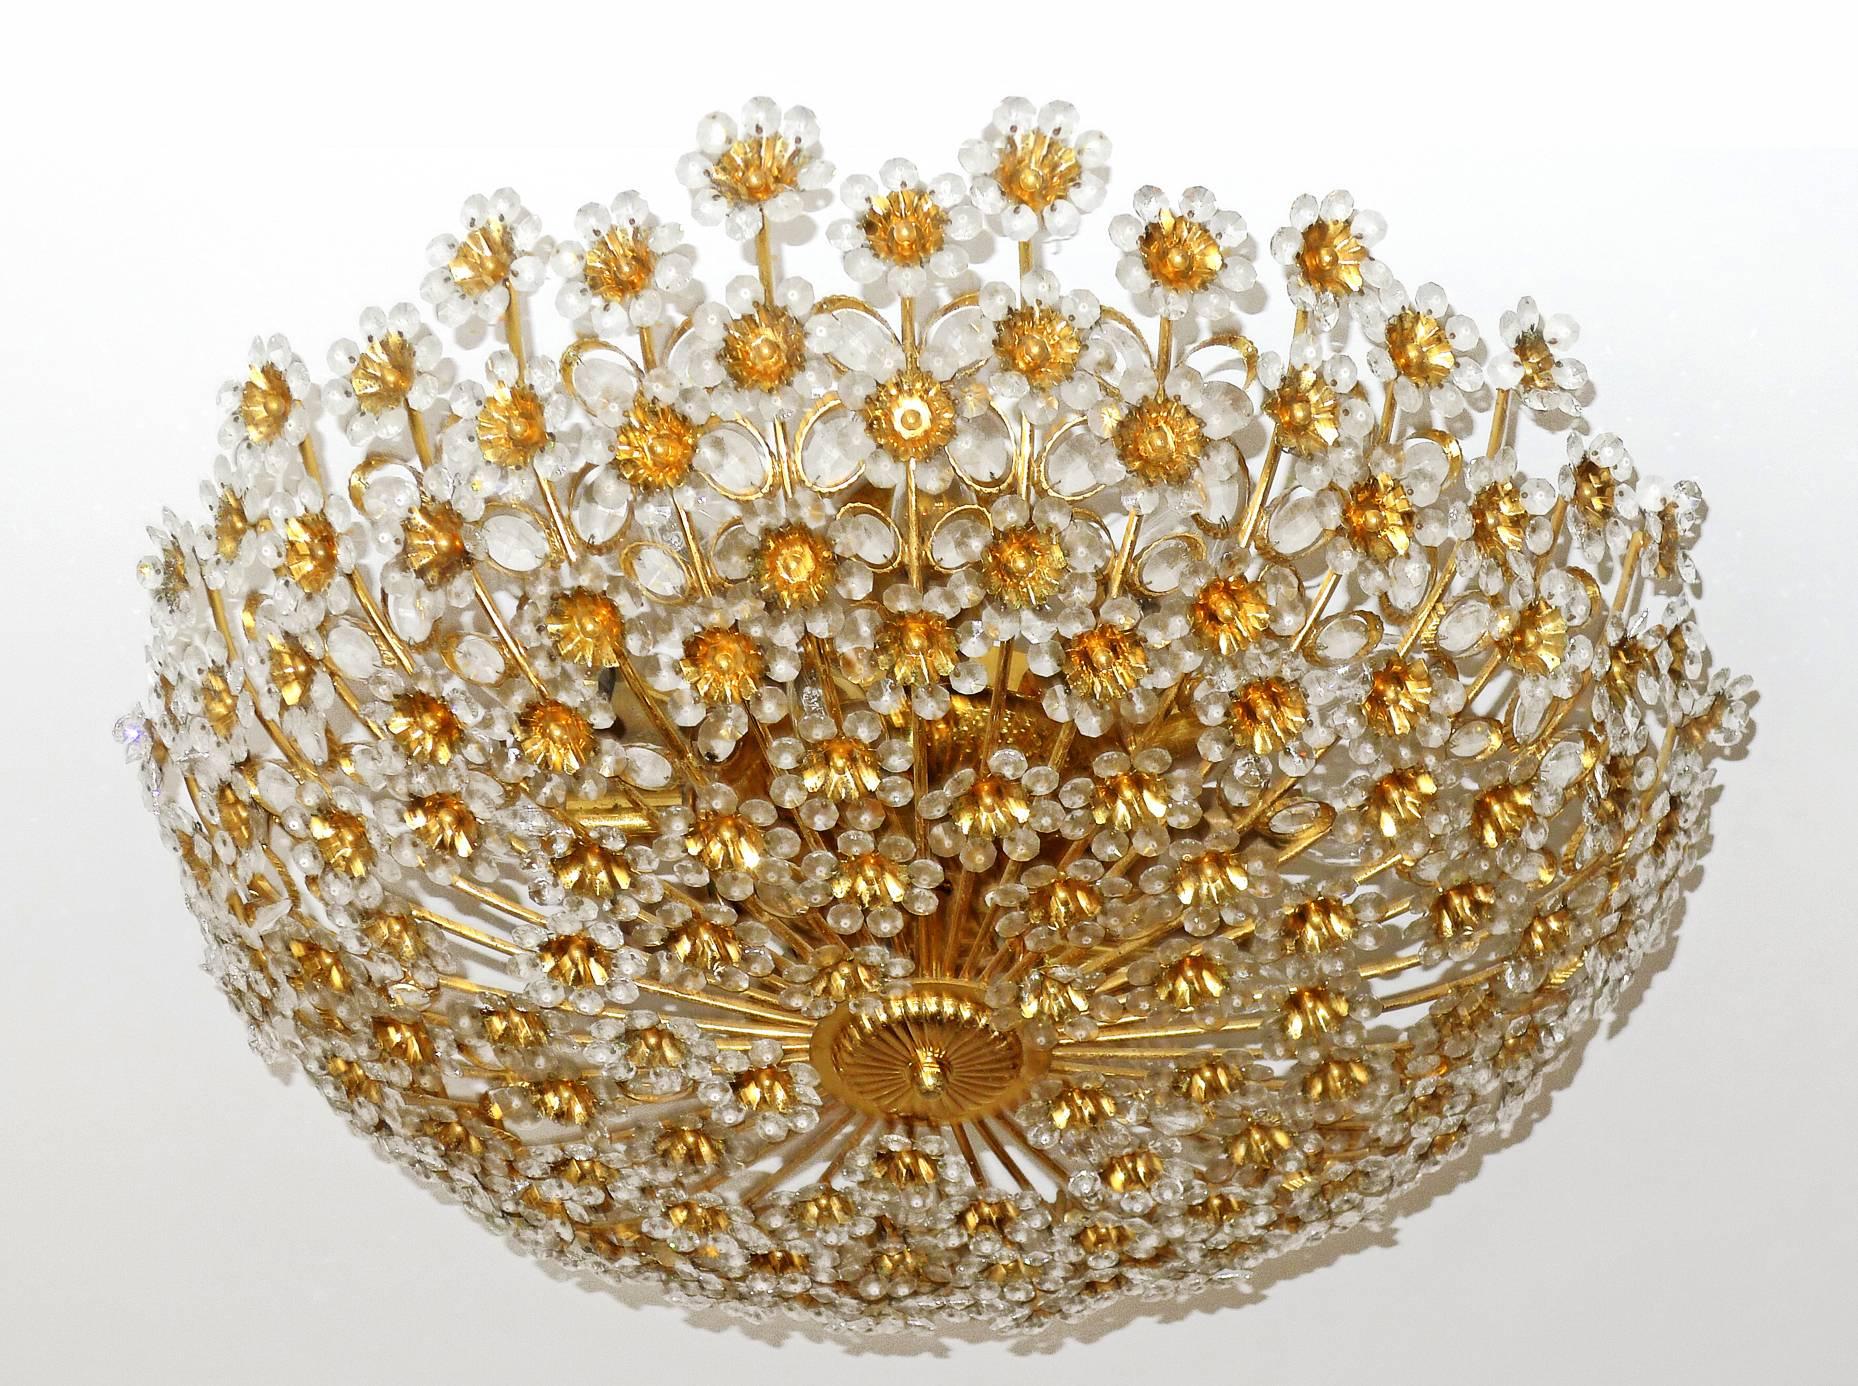 Stunning gigantic high quality luxury gold-plated brass chandelier. Very shiny with fabulous mirror effect and sparkling countless beautiful handcut faceted crystals in the shape of flowers. Original vintage condition, no missing crystals, no